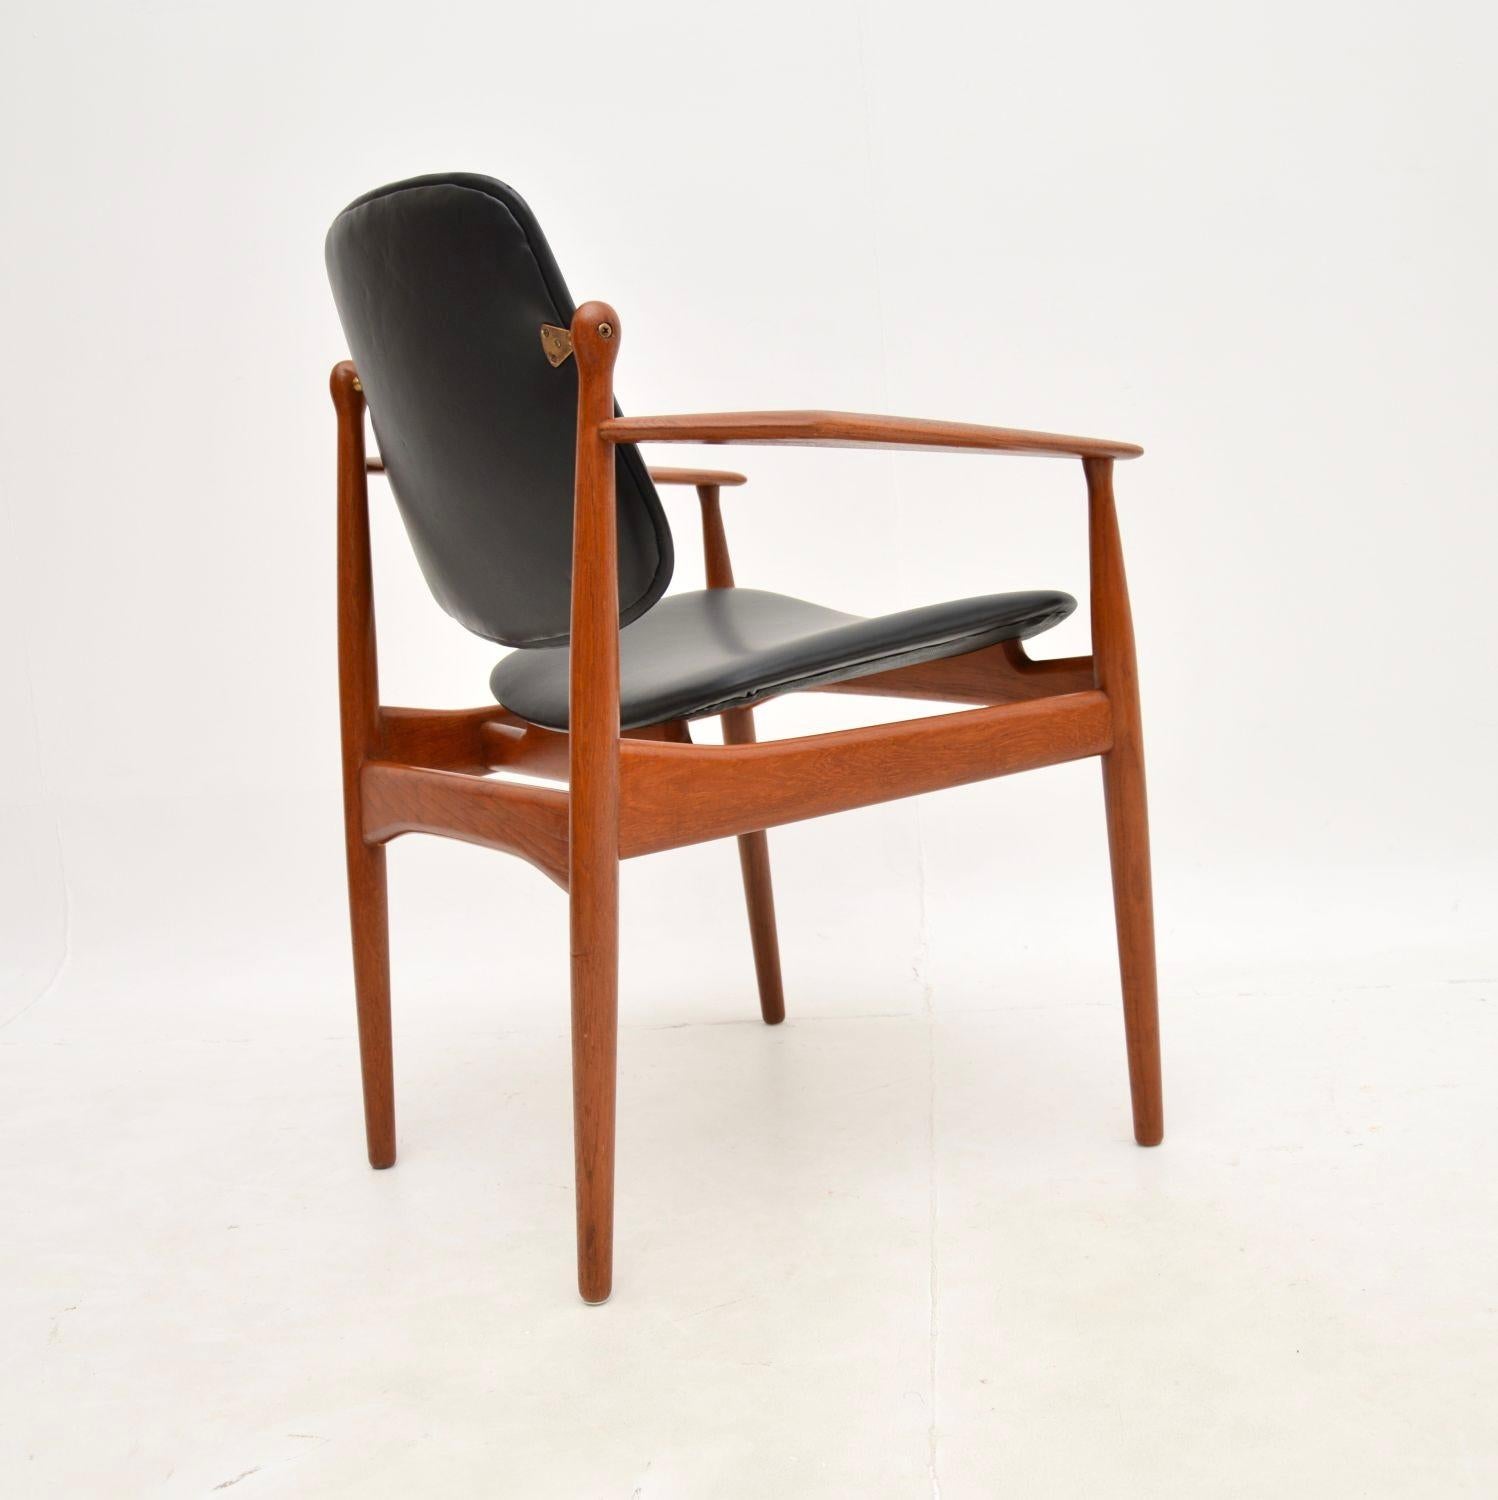 Mid-20th Century Danish Vintage Teak and Leather Armchair by Arne Vodder For Sale